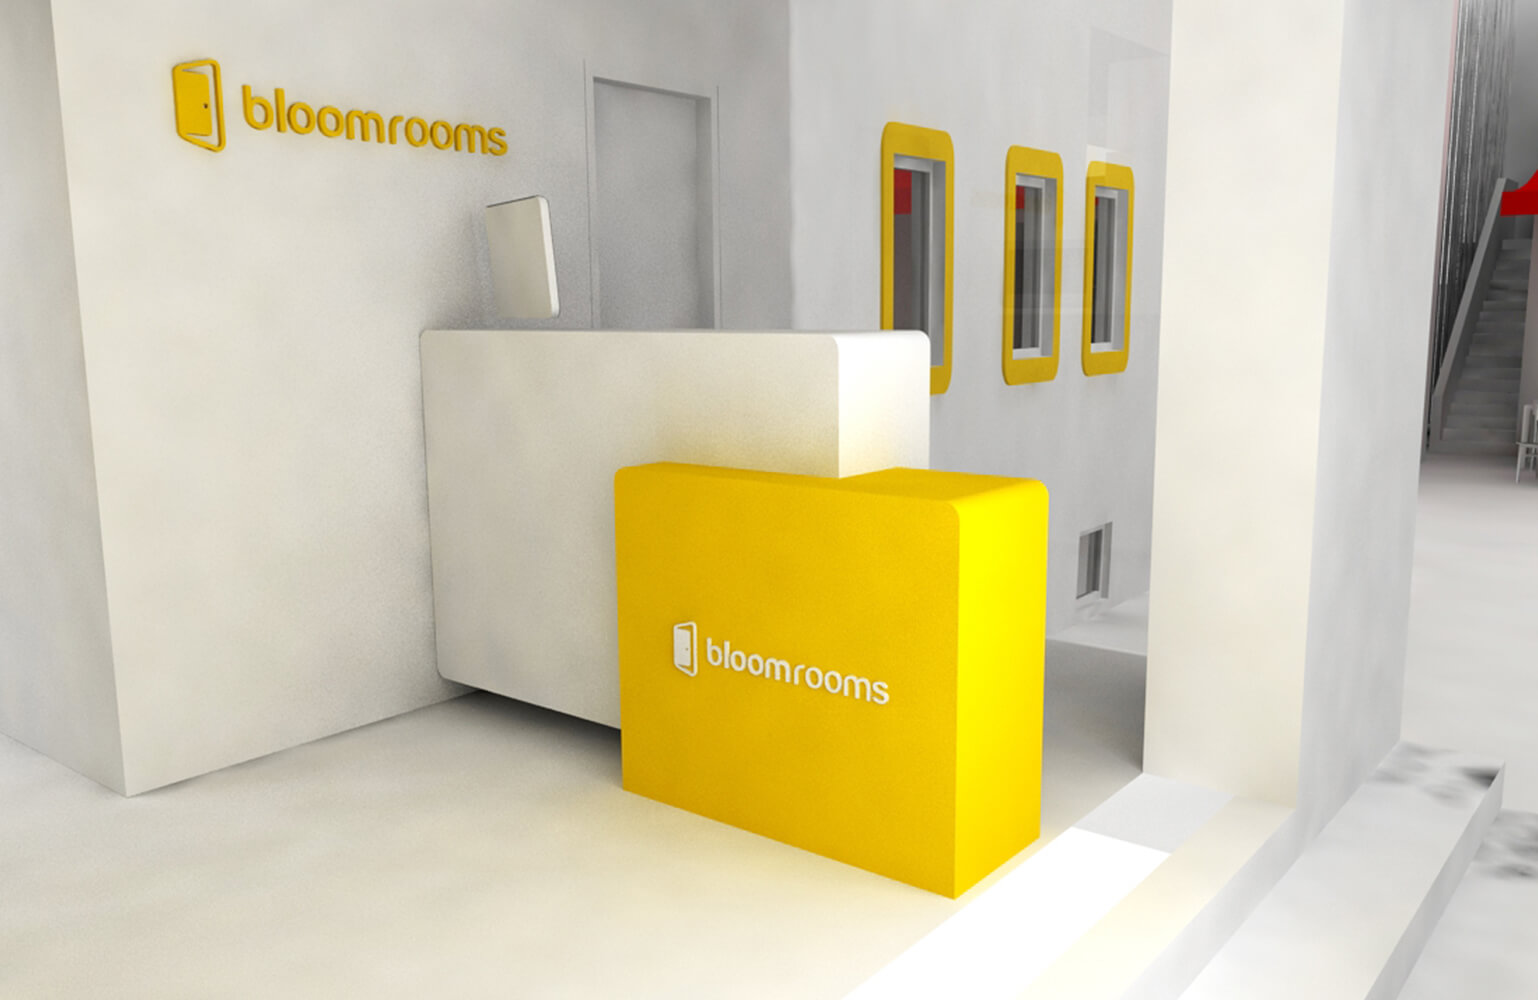 The whites and yellows of Bloomrooms!